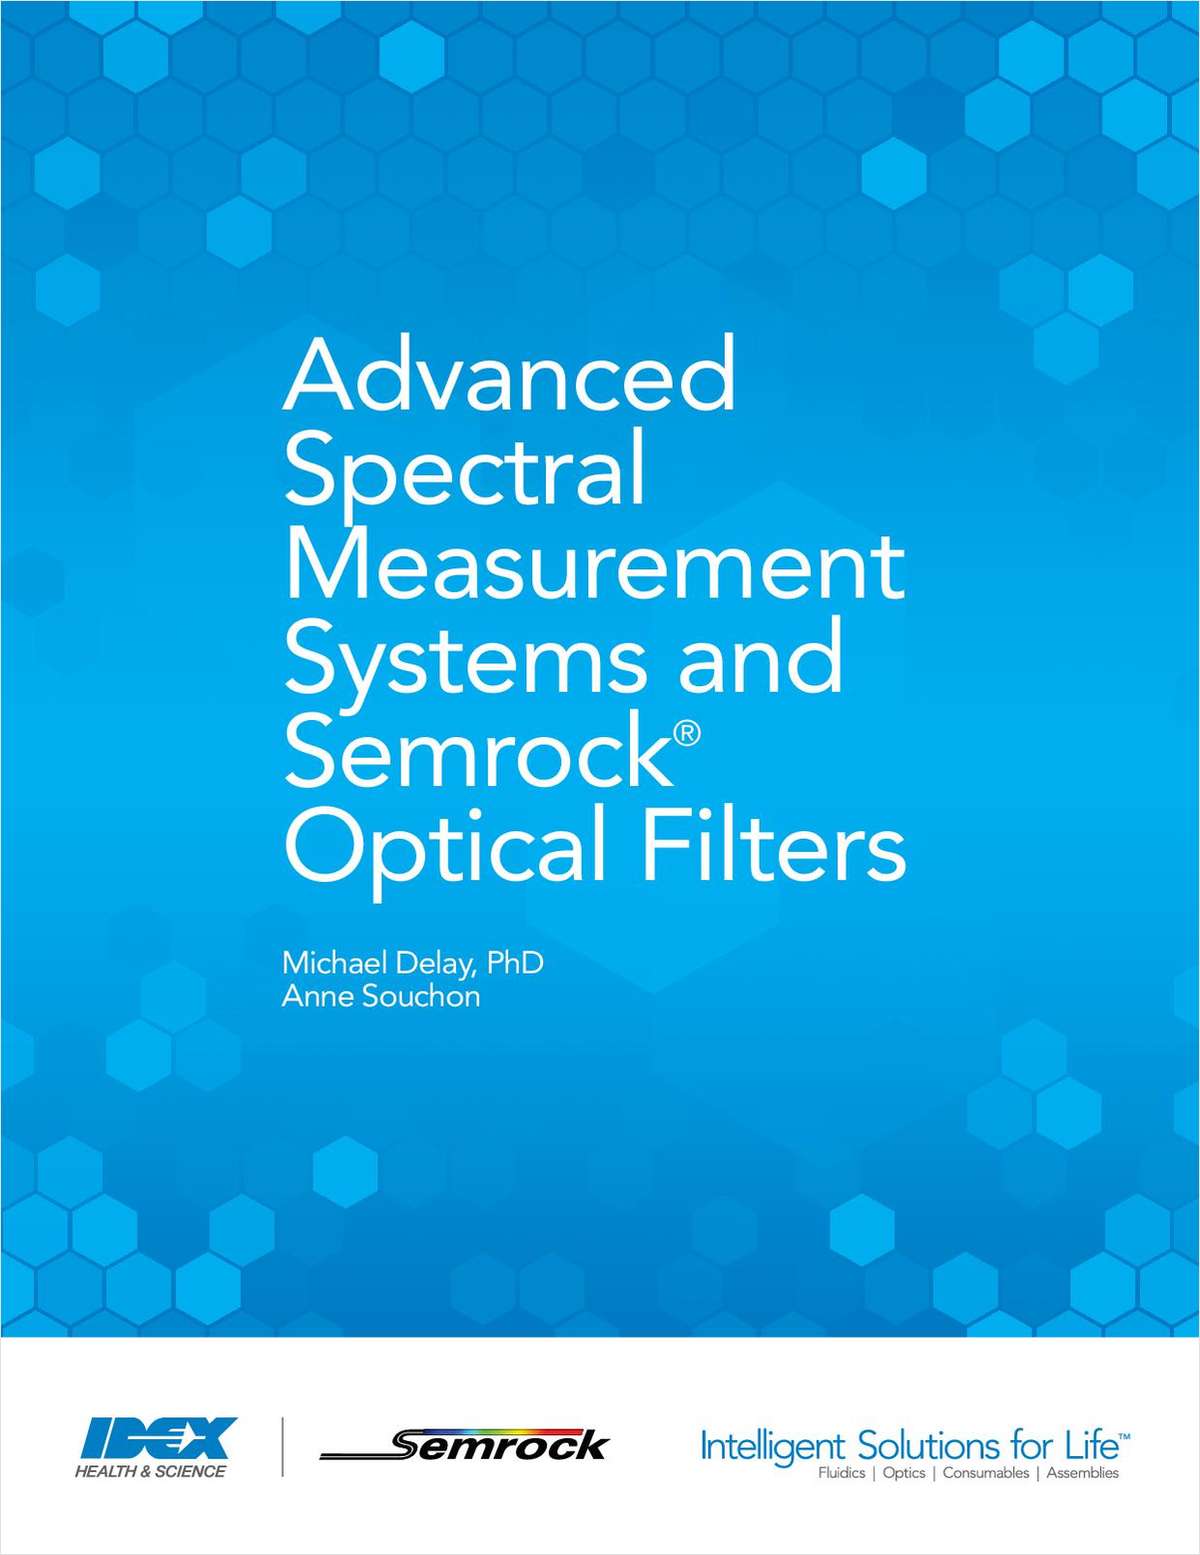 Advanced Spectral Measurement Systems and Semrock Optical Filters